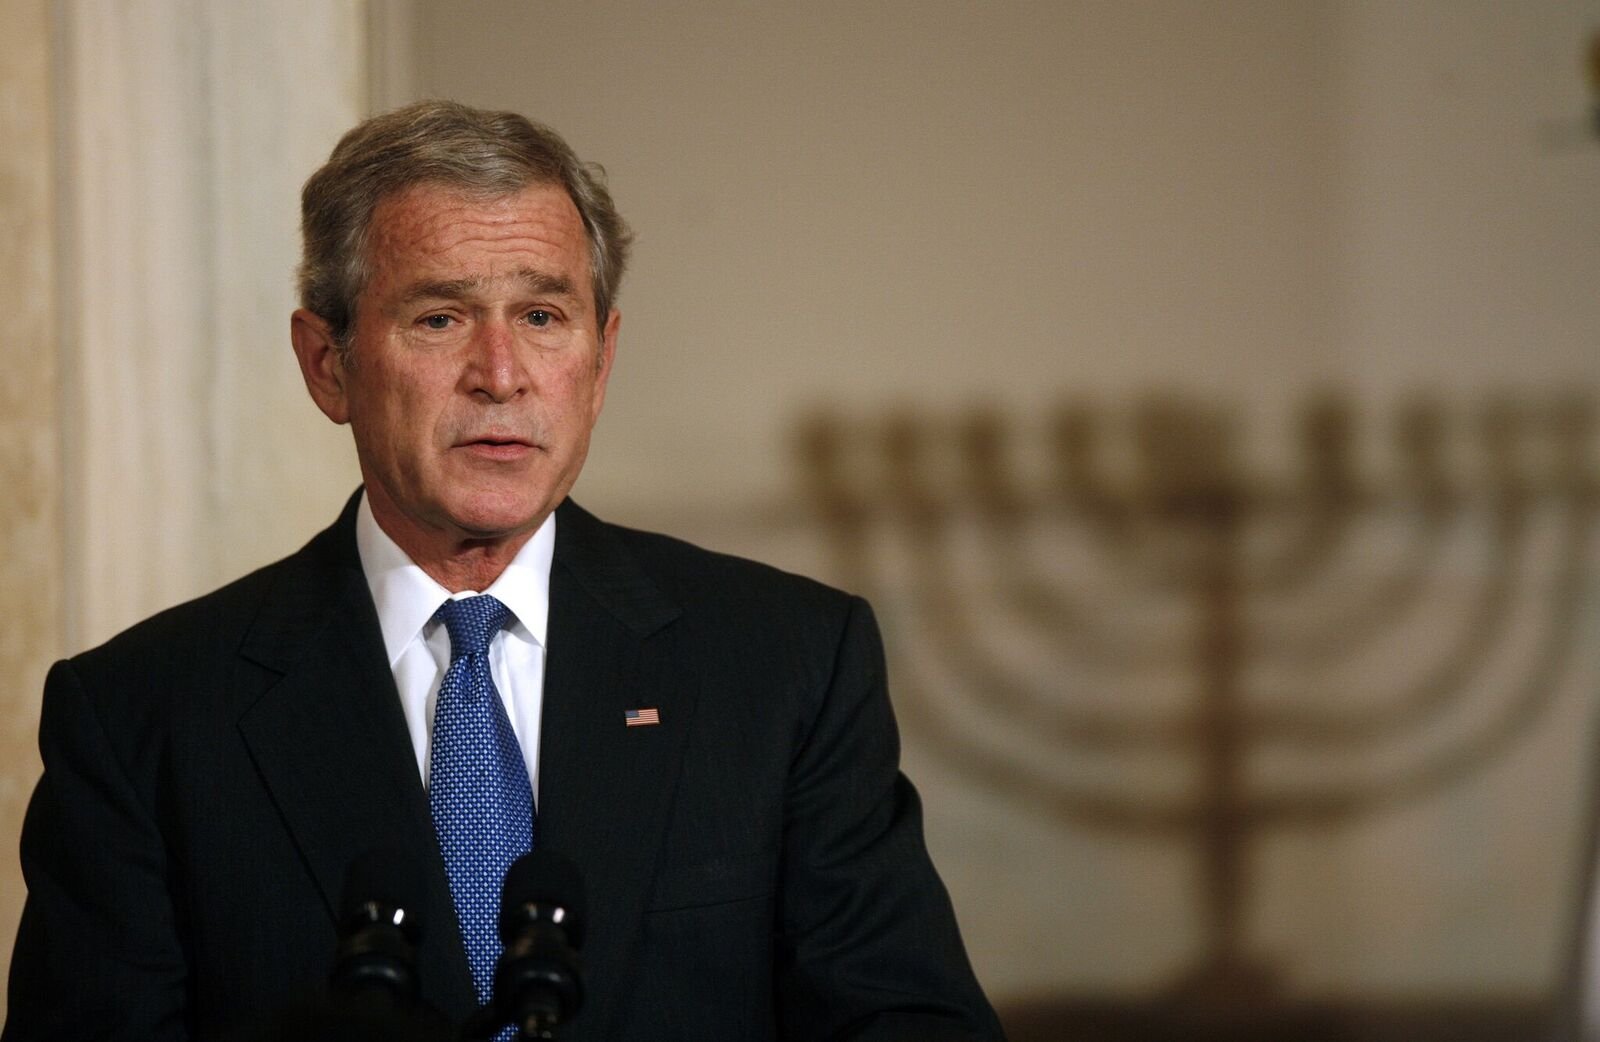 George W. Bush at a Hanukkah Reception in the Grand Foyer of the White House on December 15, 2008, in Washington, DC | Photo: Aude Guerrucci-Pool/Getty Images